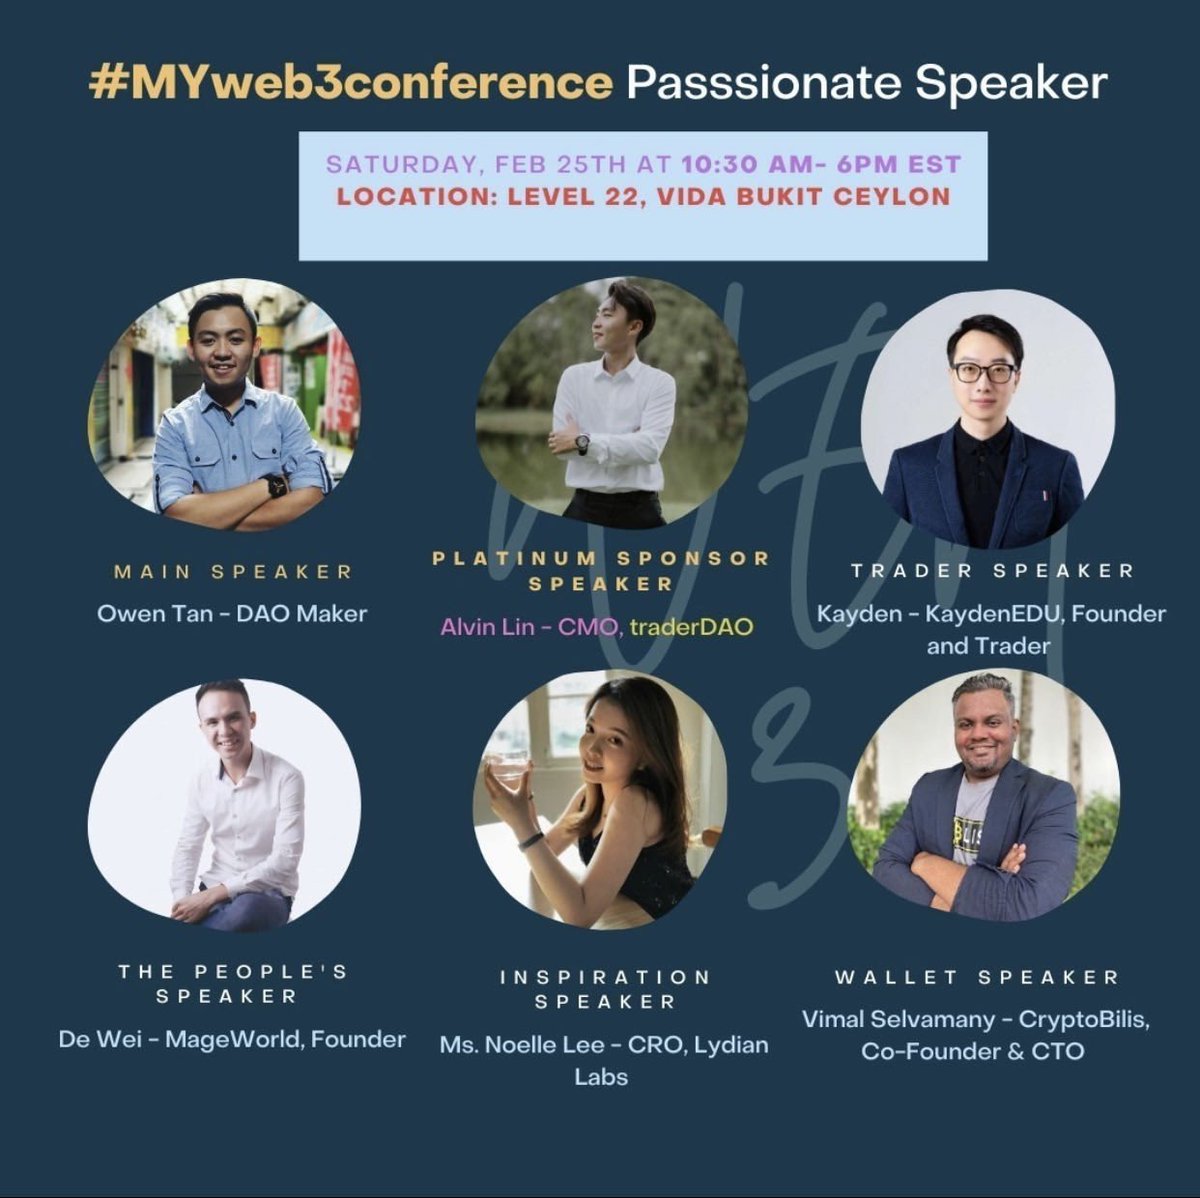 Our CRO, Noelle will be speaking on #MYweb3conference this Saturday! 

It’s our pleasure to see great initiatives brewing in our motherland and we are here to support the Web3 industry!

#LydianLabs #web3serviceagency #marketing #APACregion #Malaysia